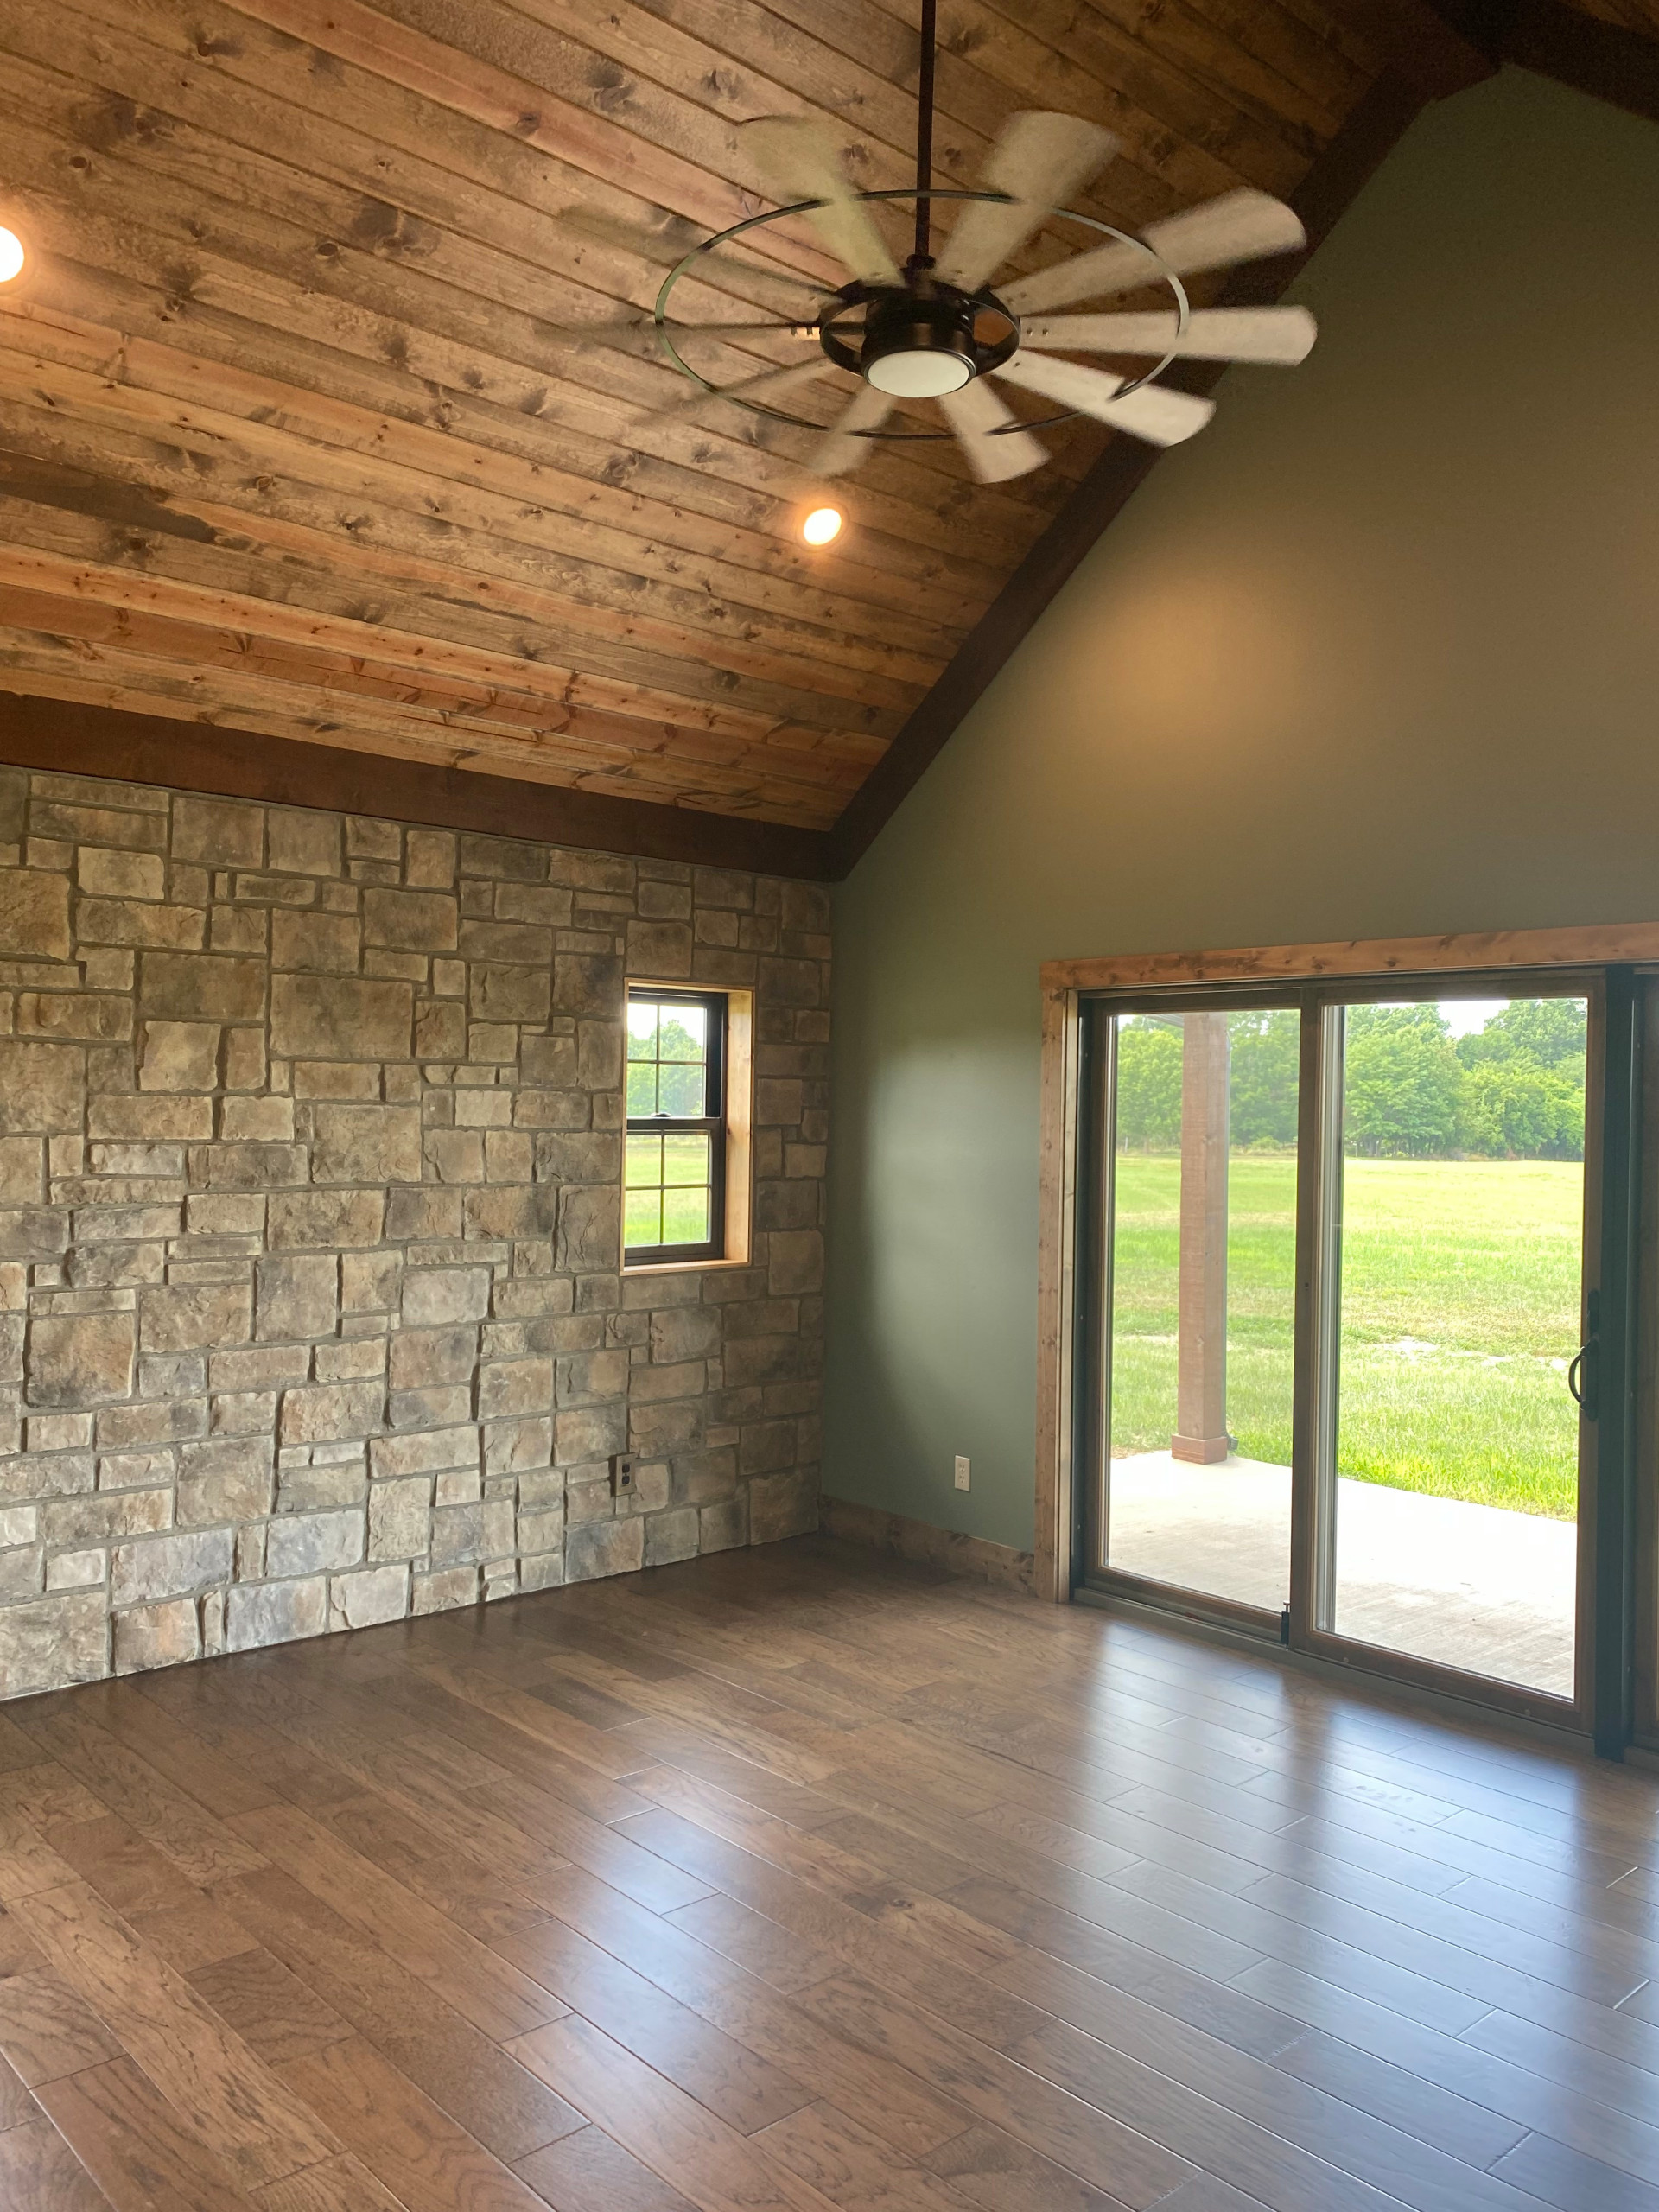 Master bedroom with stained carside ceiling, rock wall and slider doors